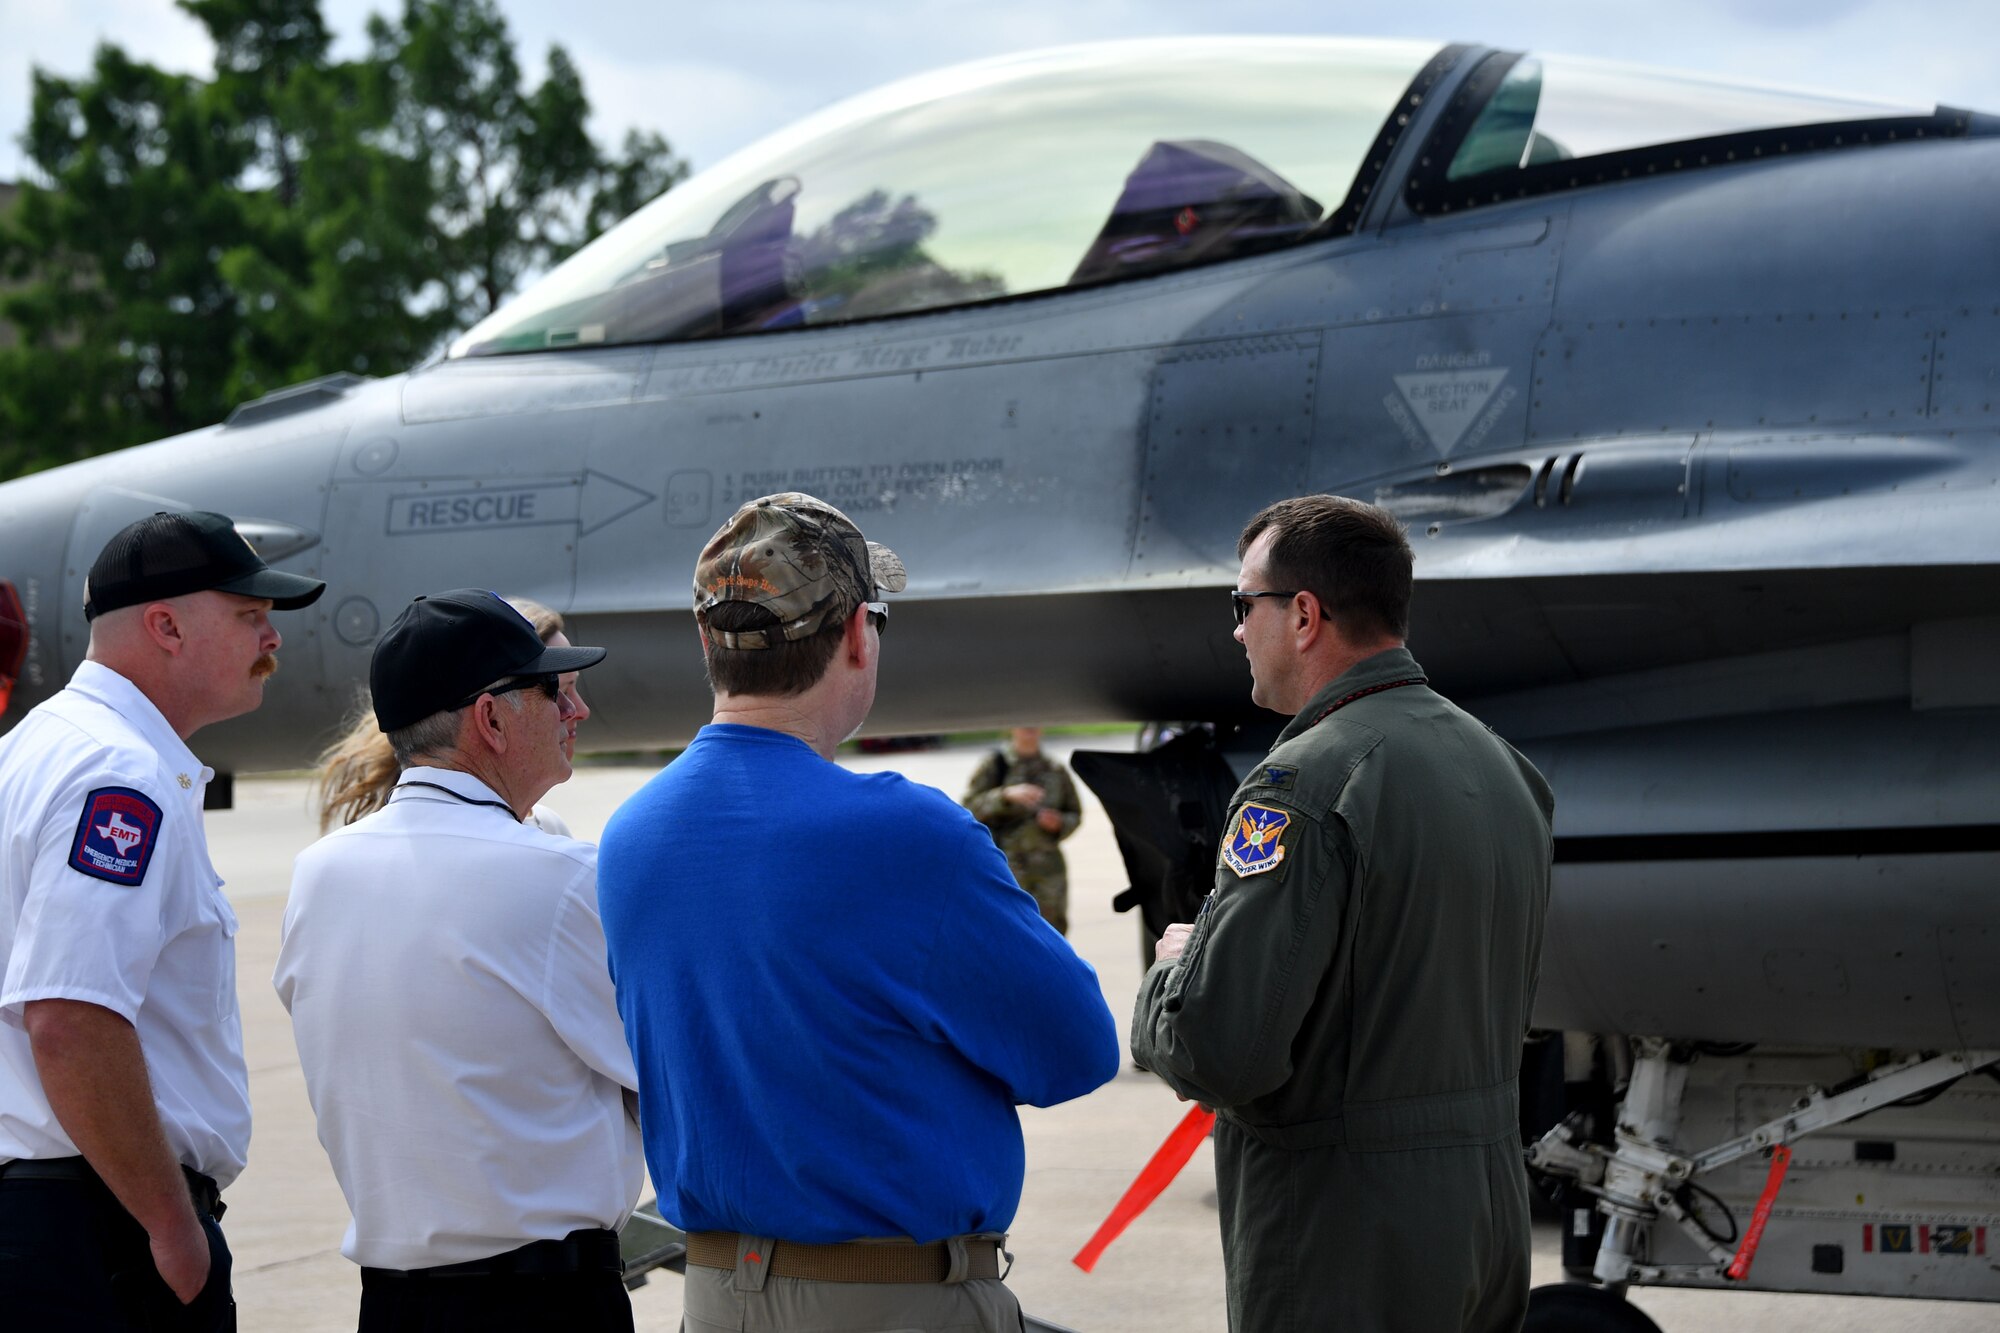 (right) Col. Korey “Axe” Amundson, 301st Fighter Wing vice commander, describes an F-16 Fighting Falcon for Dallas/Fort Worth civic leaders on June 11, 2021, at U.S. Naval Air Station Joint Reserve Base Fort Worth, Texas. The F-16 Fighting Falcon is a compact, multi-role fighter aircraft. It is highly maneuverable and has proven itself in air-to-air combat and air-to-surface attack. (U.S. Air Force photo by Staff Sgt. Randall Moose)